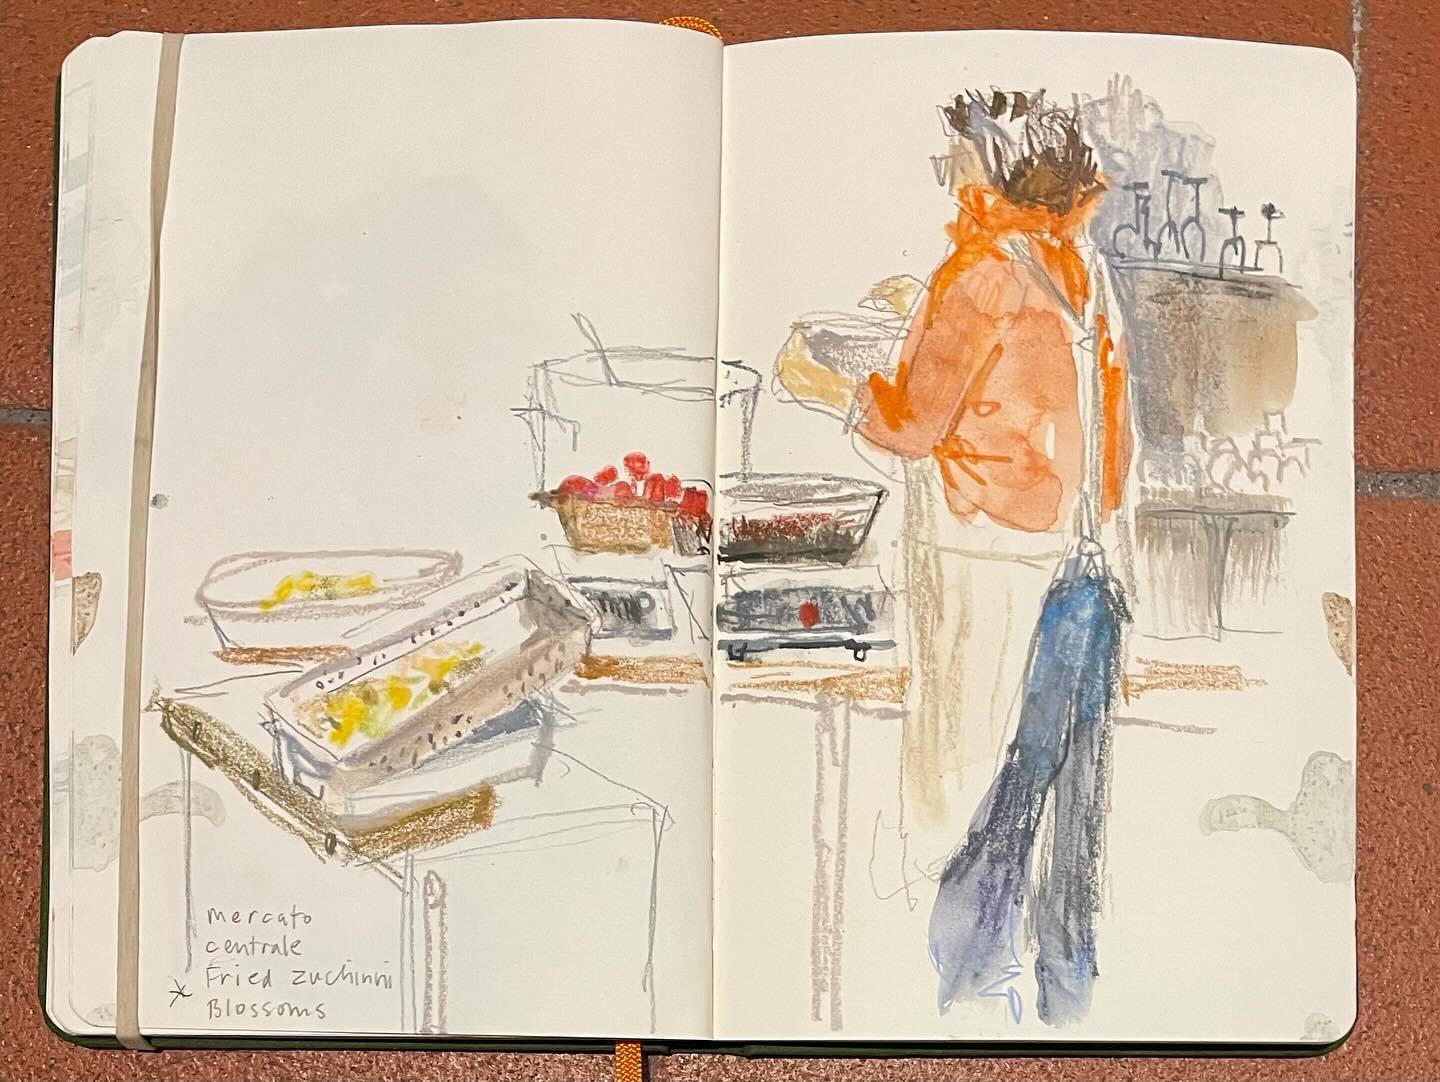 Today&rsquo;s post: the chef of the squash blossoms. Stumbled into the central market and had to binge on these fried zucchini blossoms. Then I had to draw the chef. Swipe to see the short video I got of him passing out samples. 
#squash #squashbloss